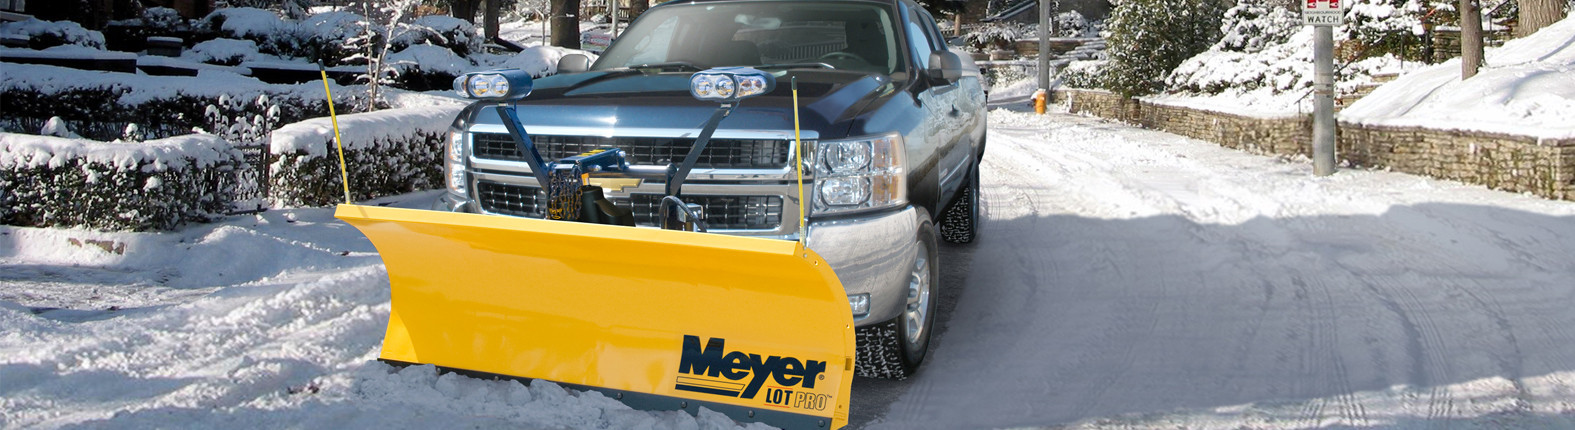 Snow Plows - Contractor & Personal Use